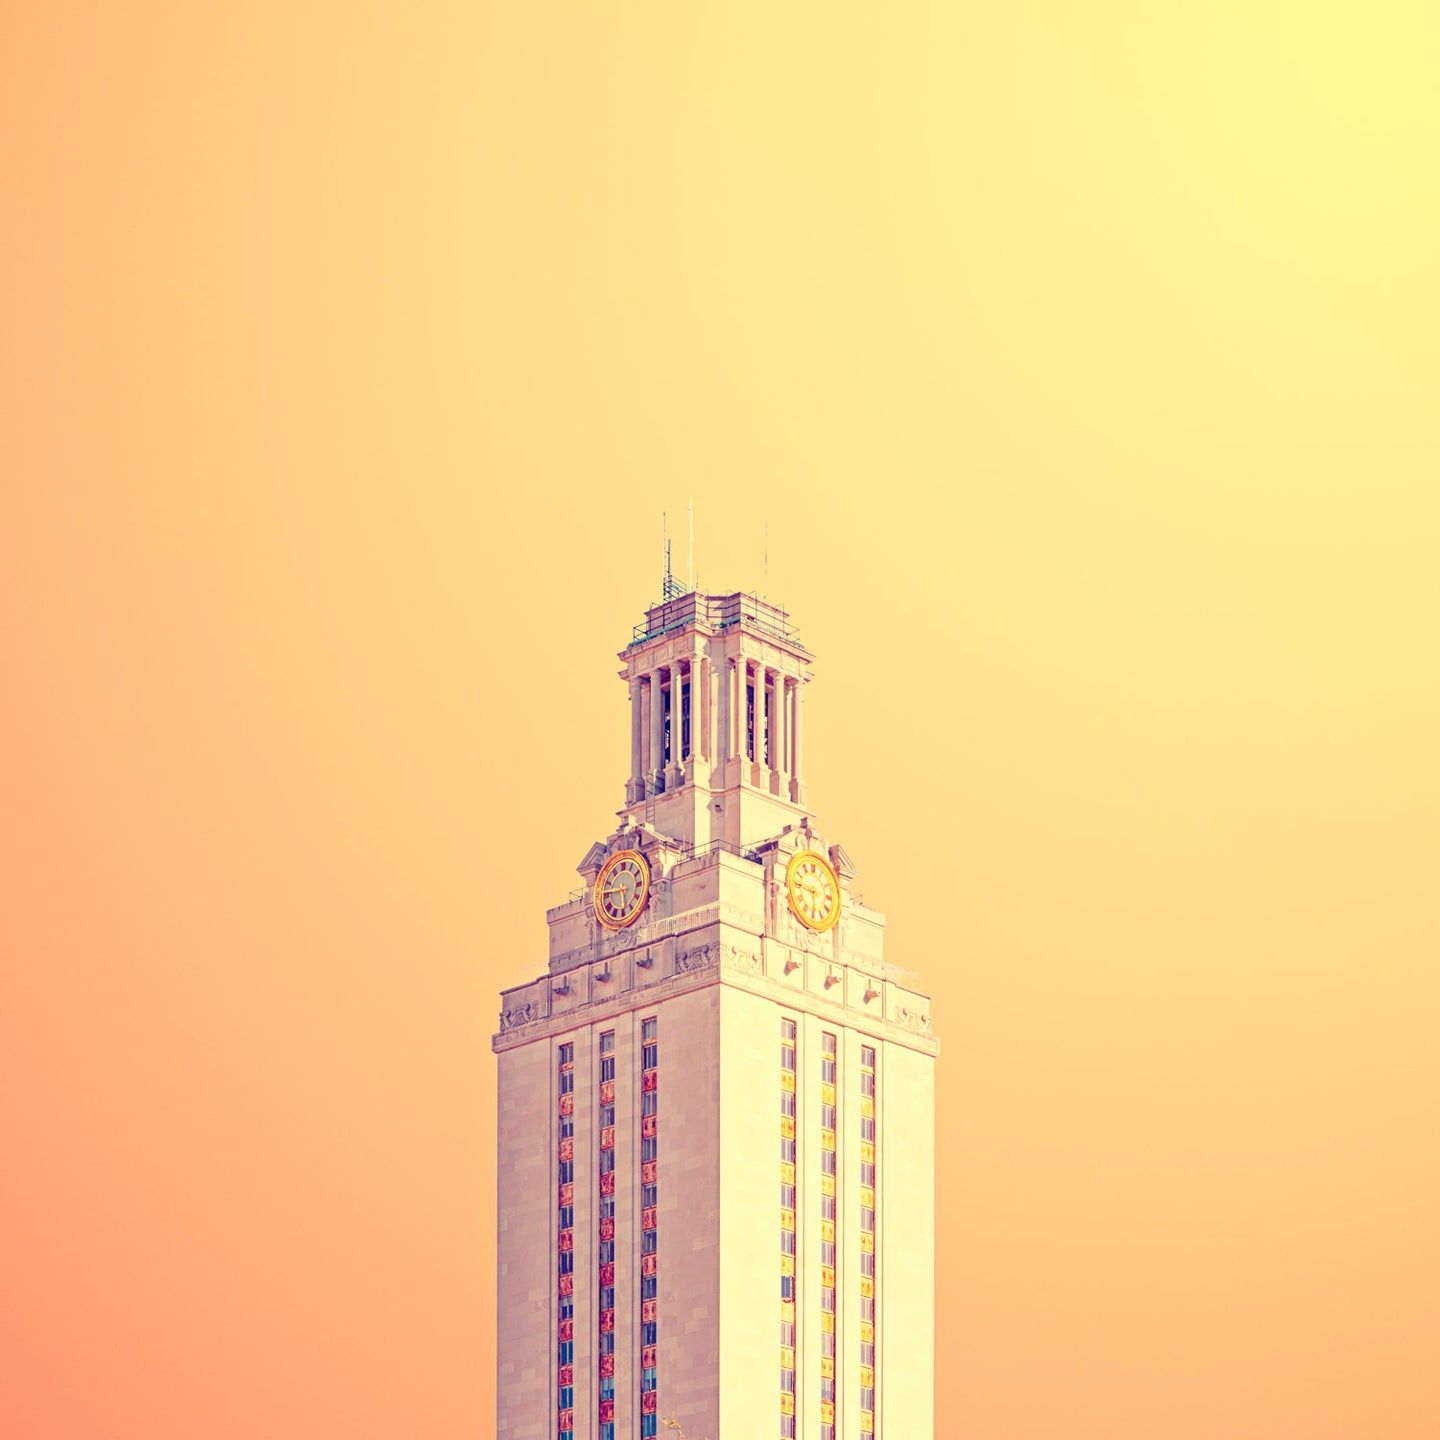 A tall building with clock tower on top - Texas